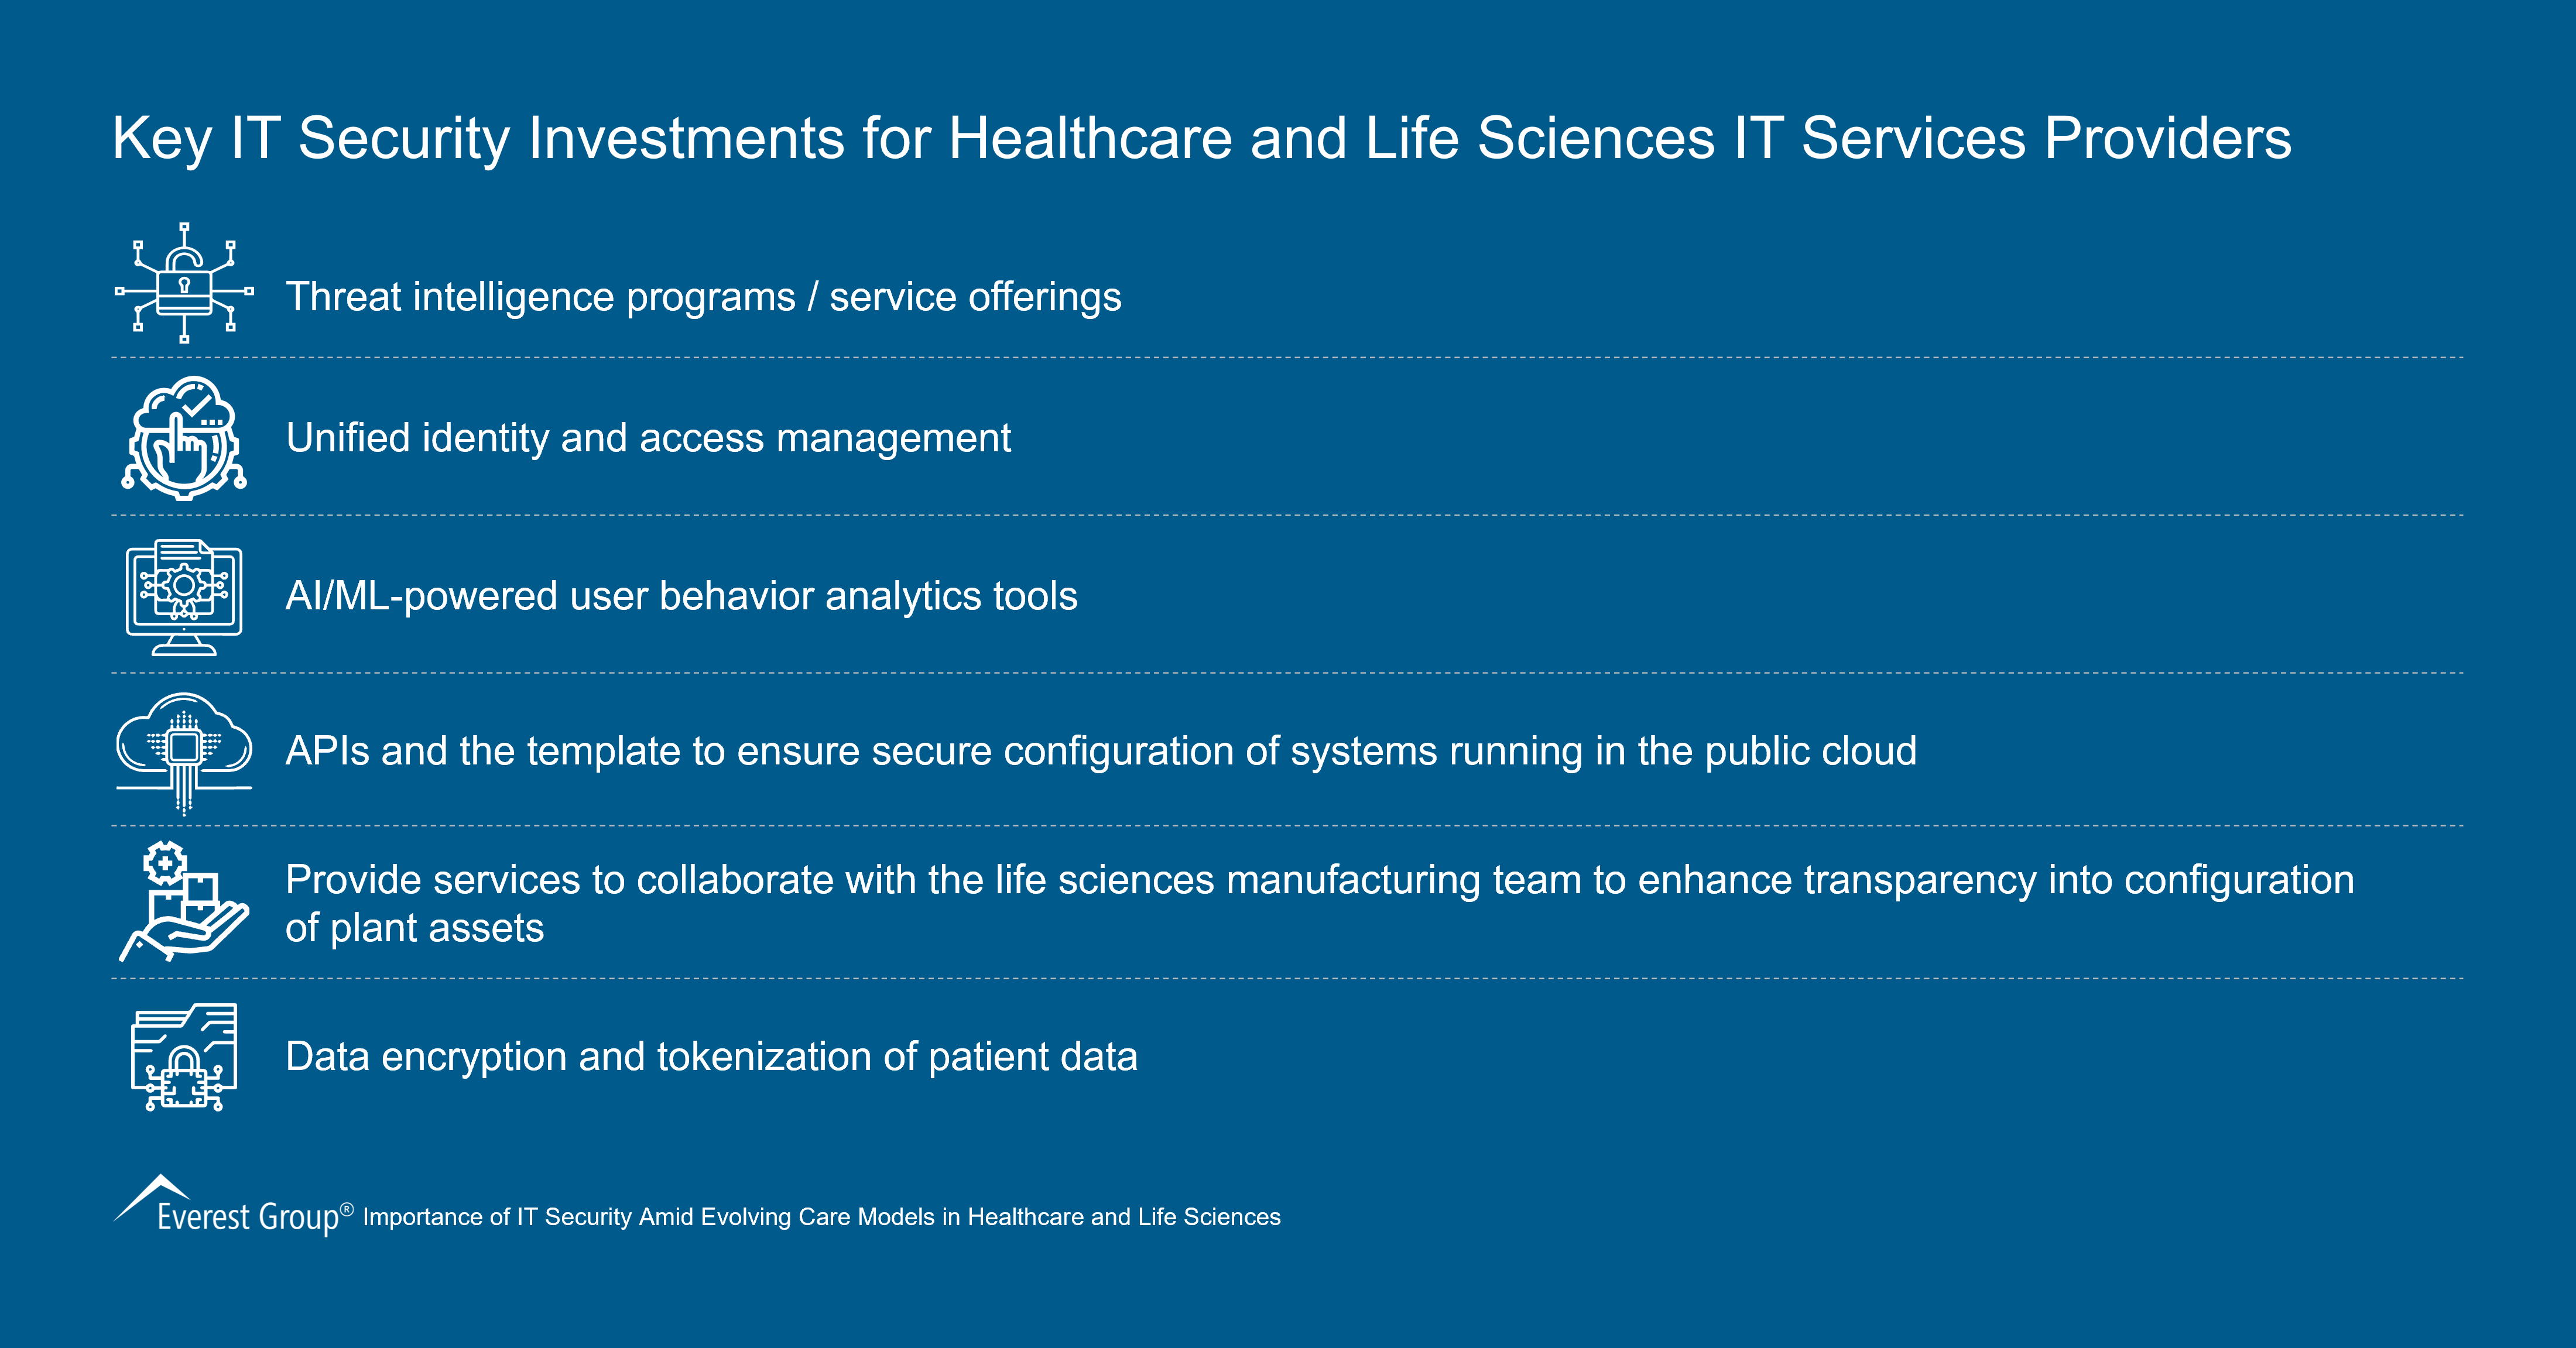 Key IT Security Investments for Healthcare and Life Sciences IT Services Providers